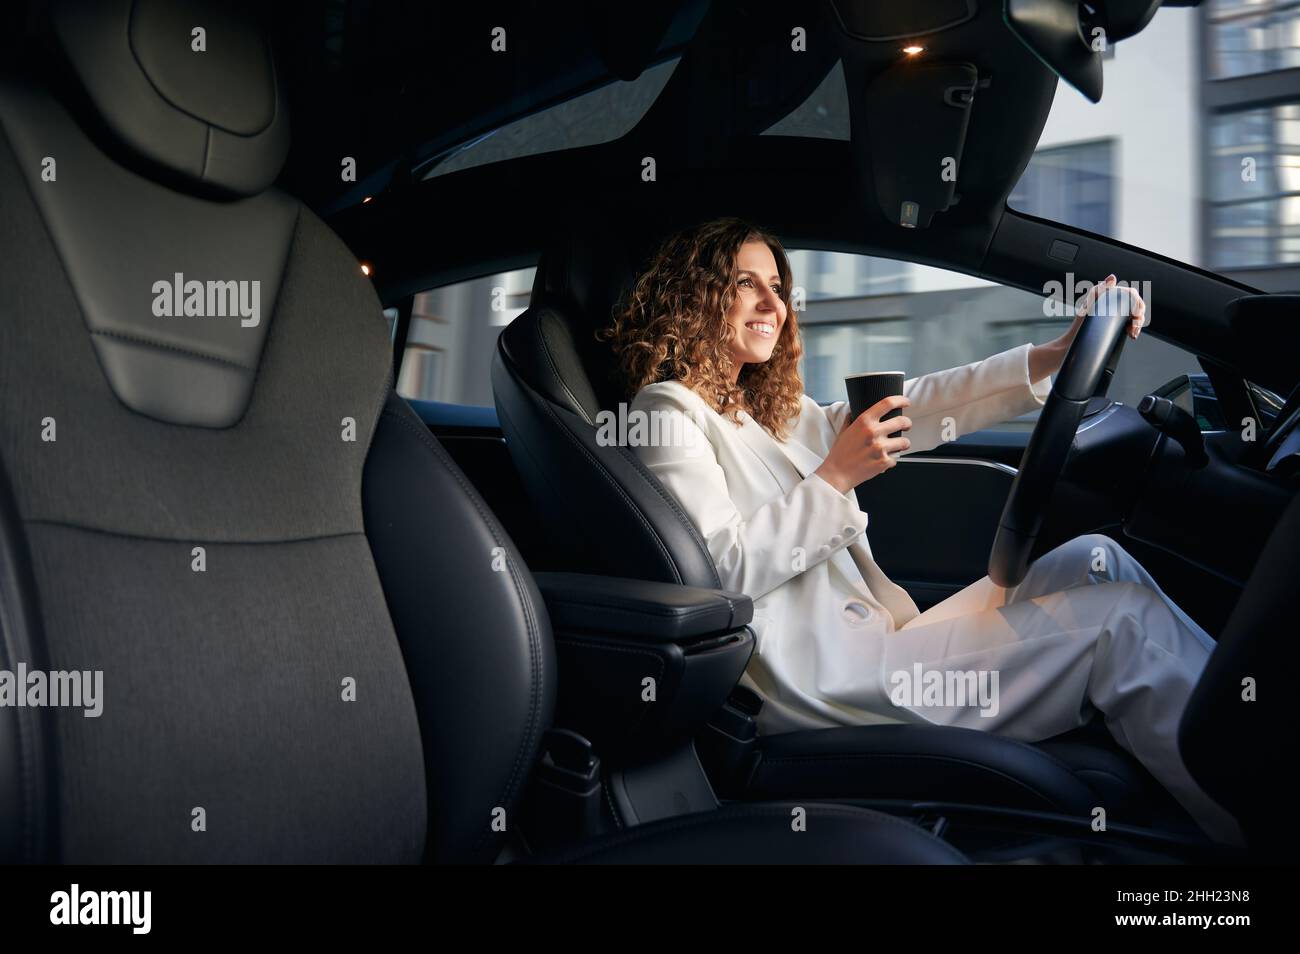 Cheerful Caucasian business woman have breakfast during time for driving corporate automobile, happy female entrepreneur with takeaway coffee to go smiling while steering vehicle transport Stock Photo